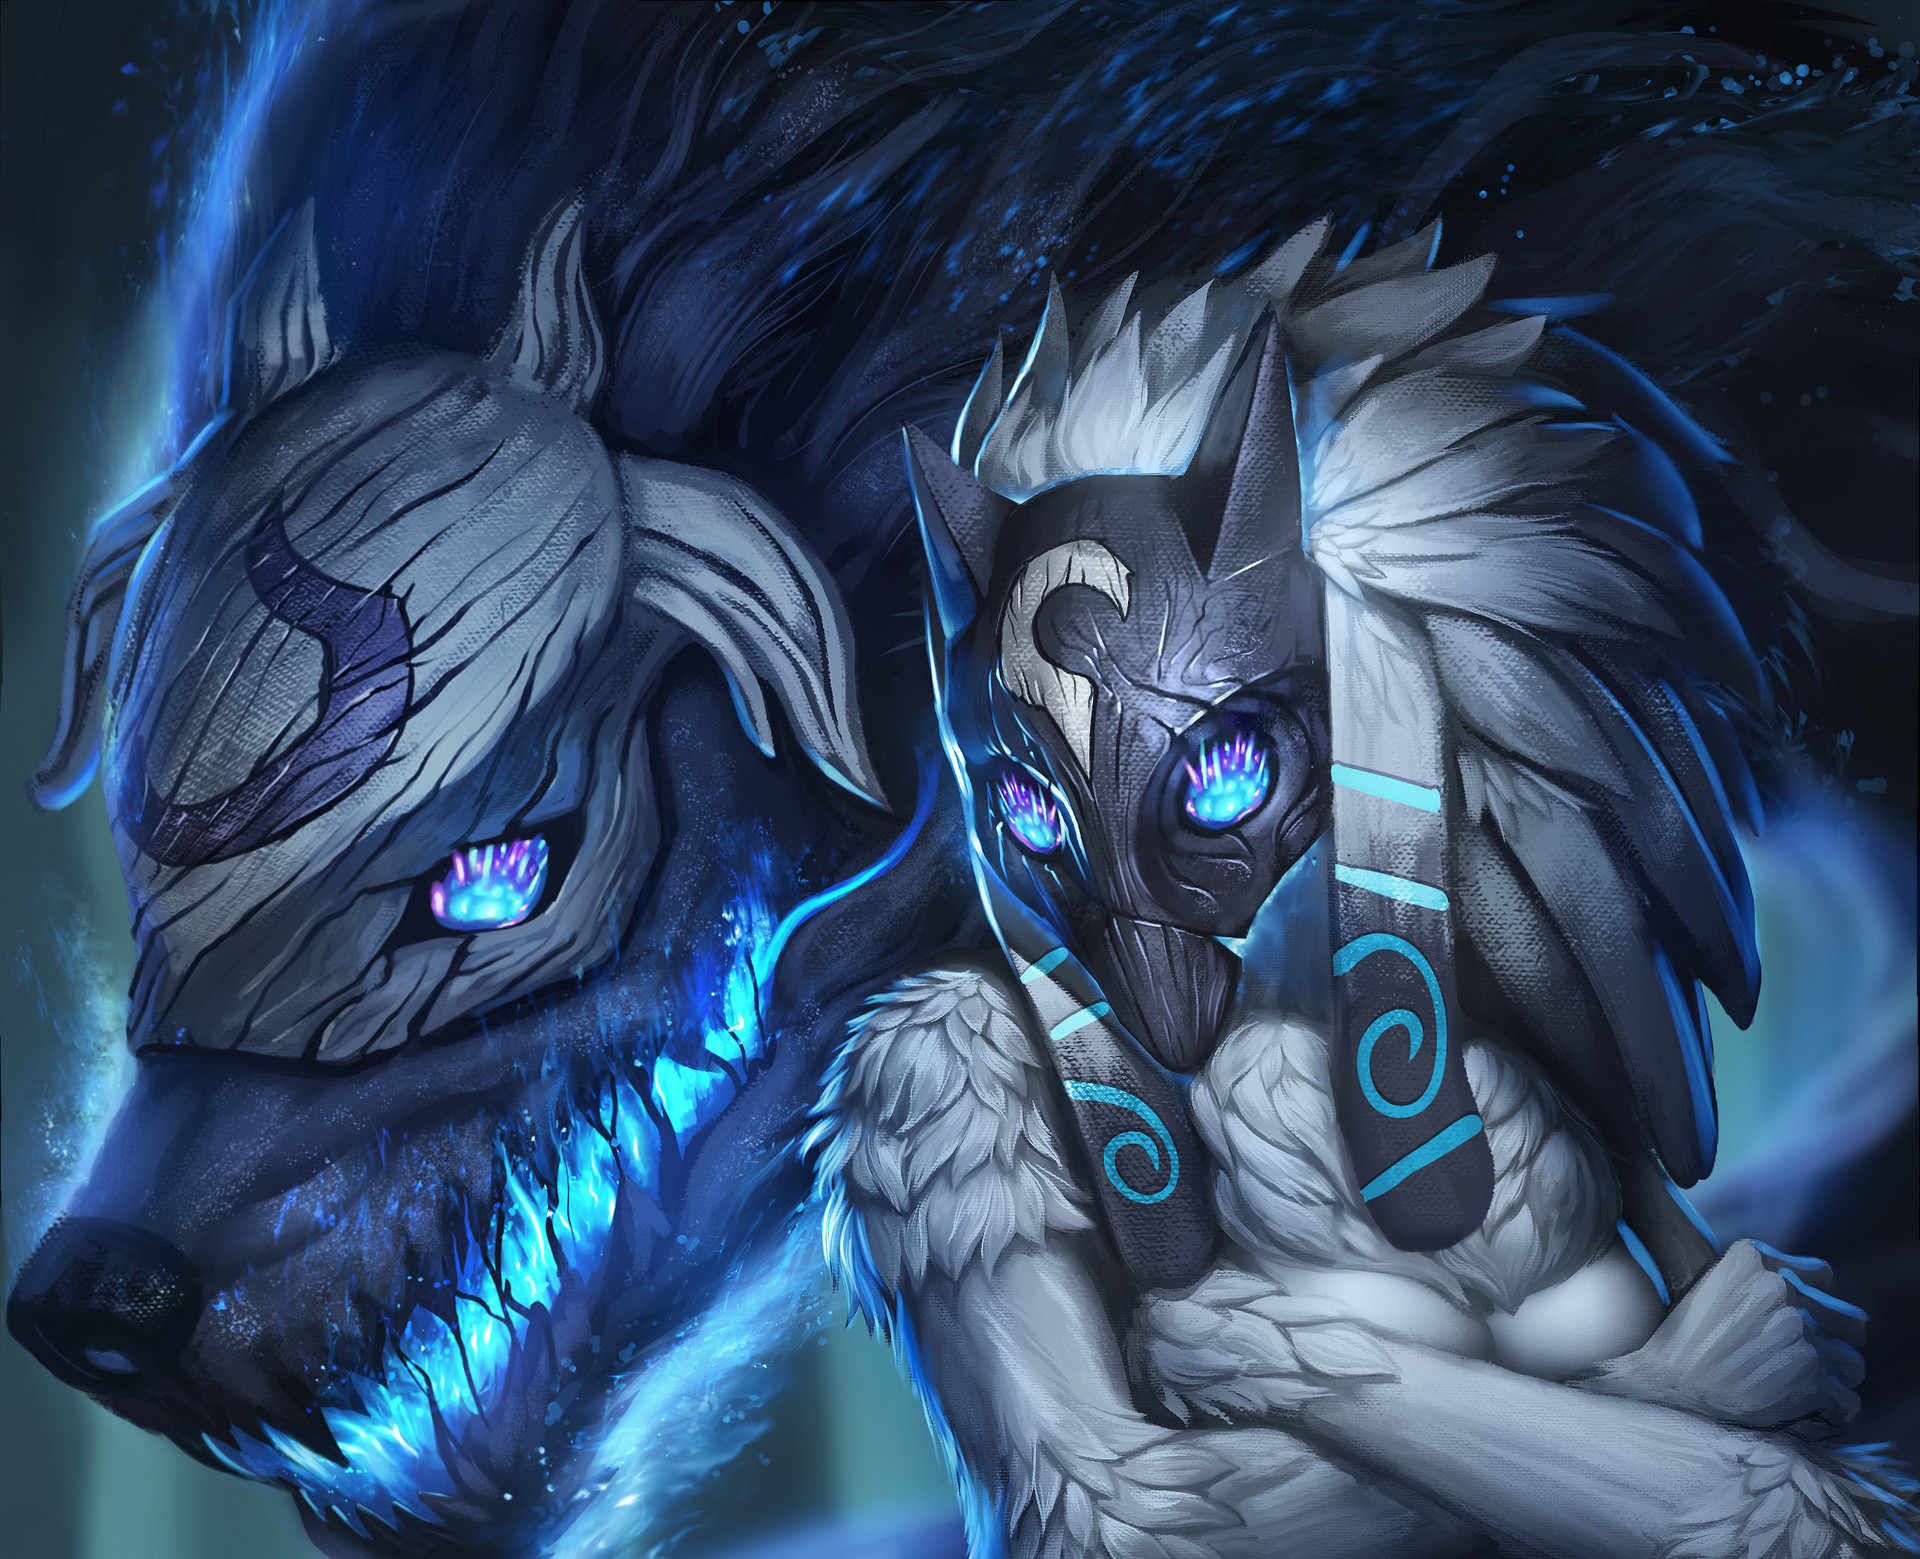 kindred (league of legends), video game, league of legends